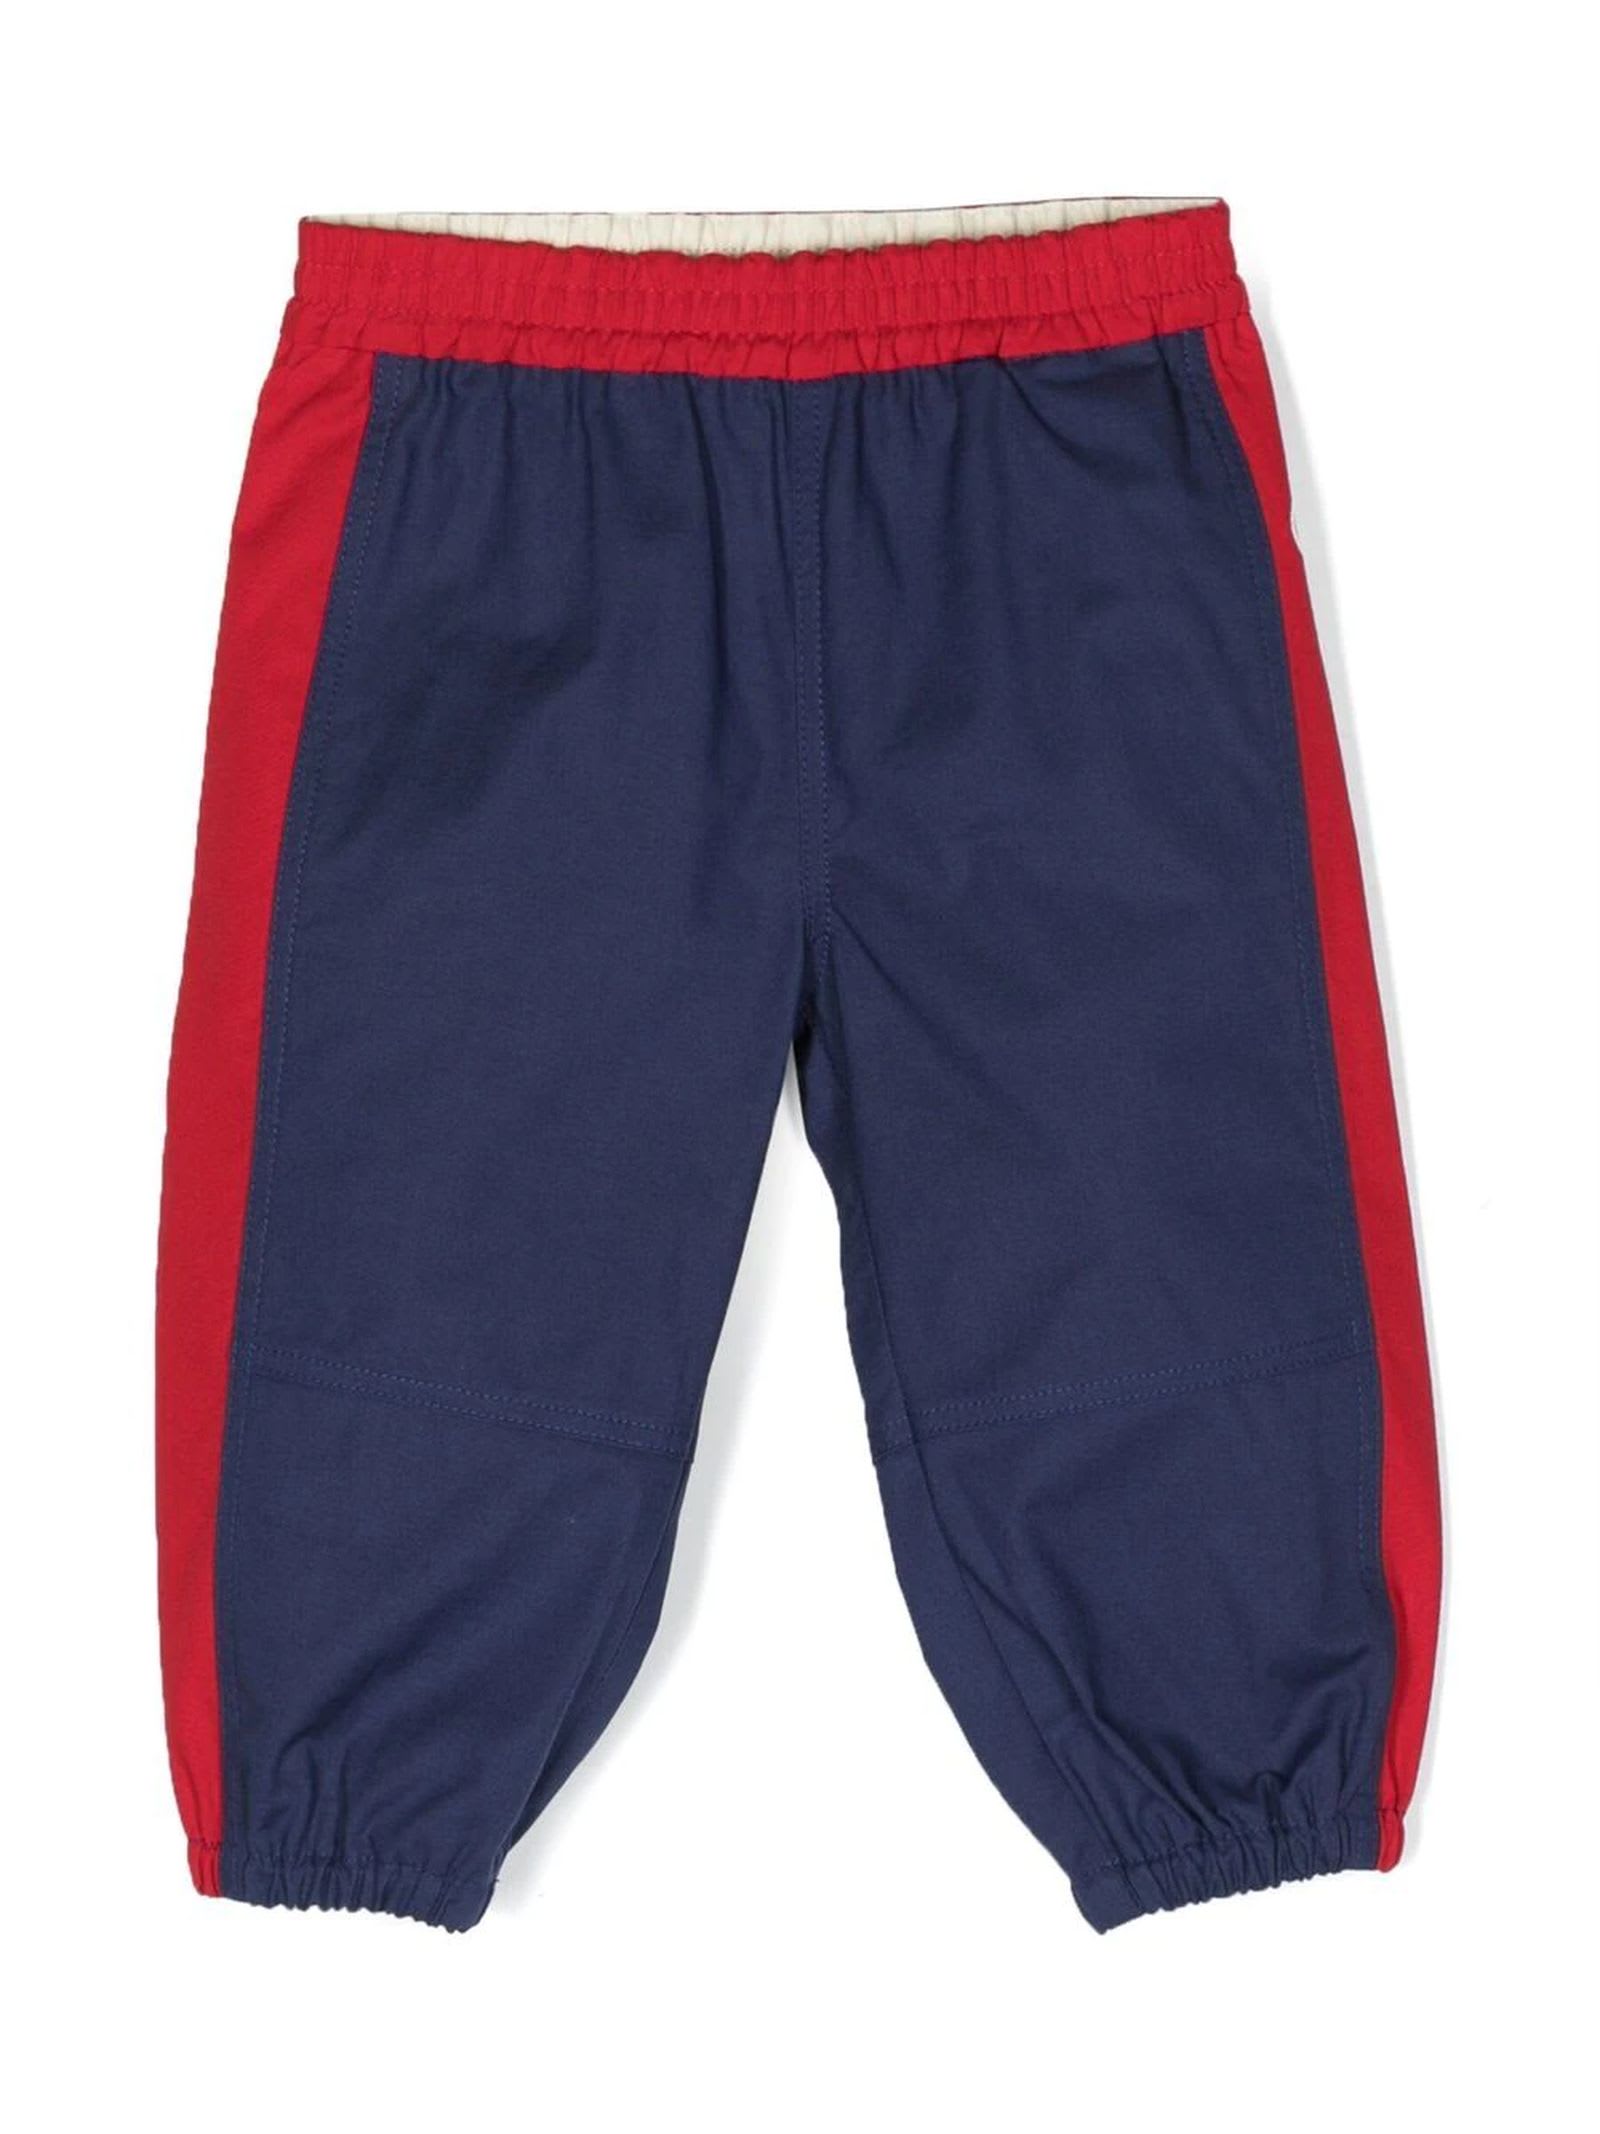 GUCCI RED AND BLUE TRACK PANTS